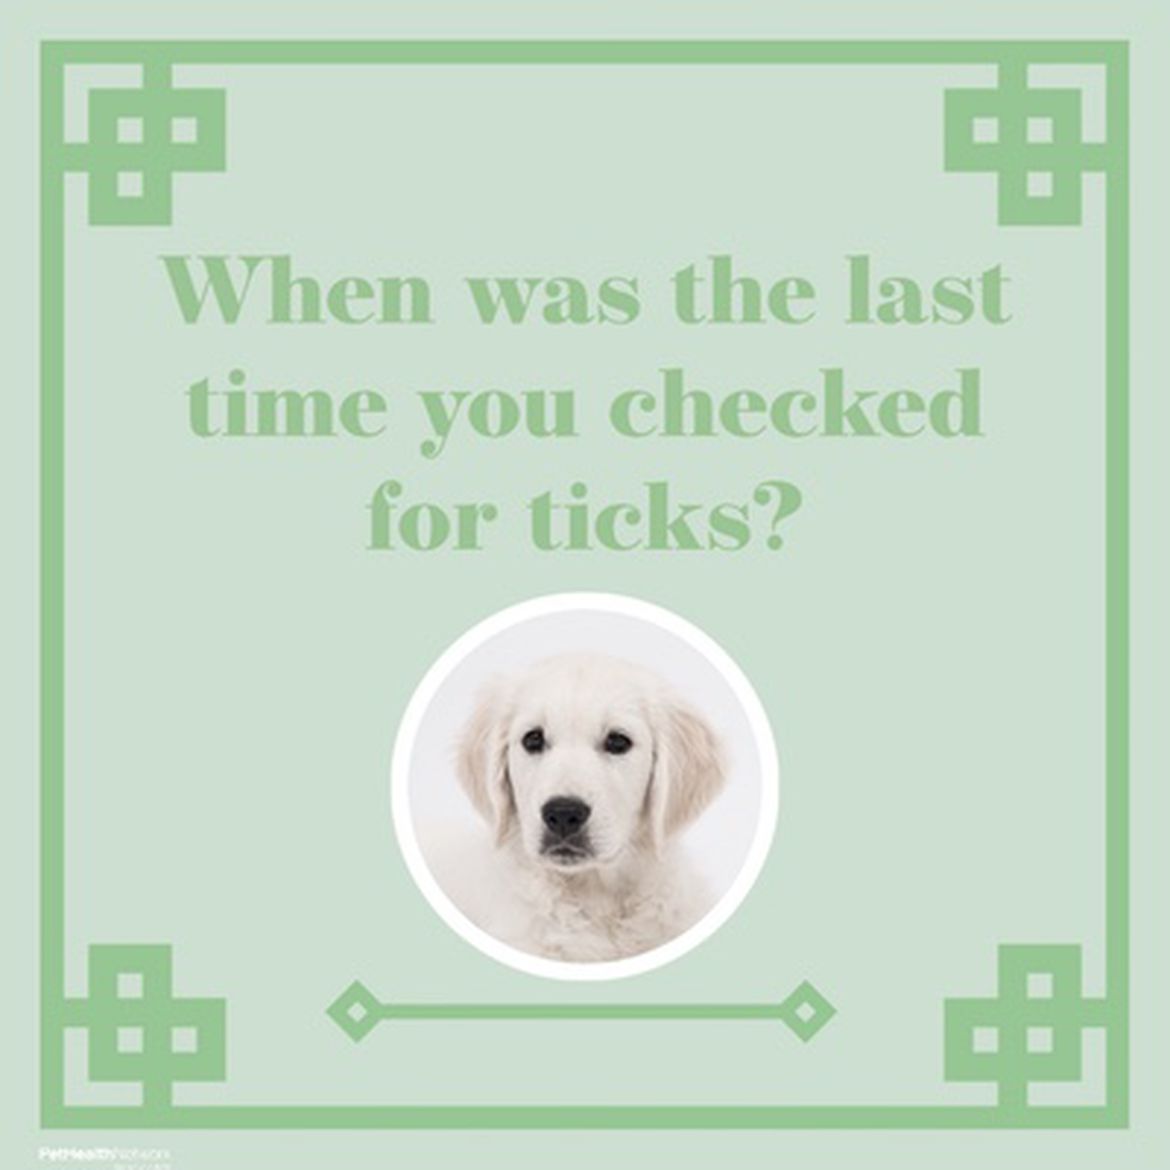 Social media post to remind pet owners to regularly check for ticks on their pets.